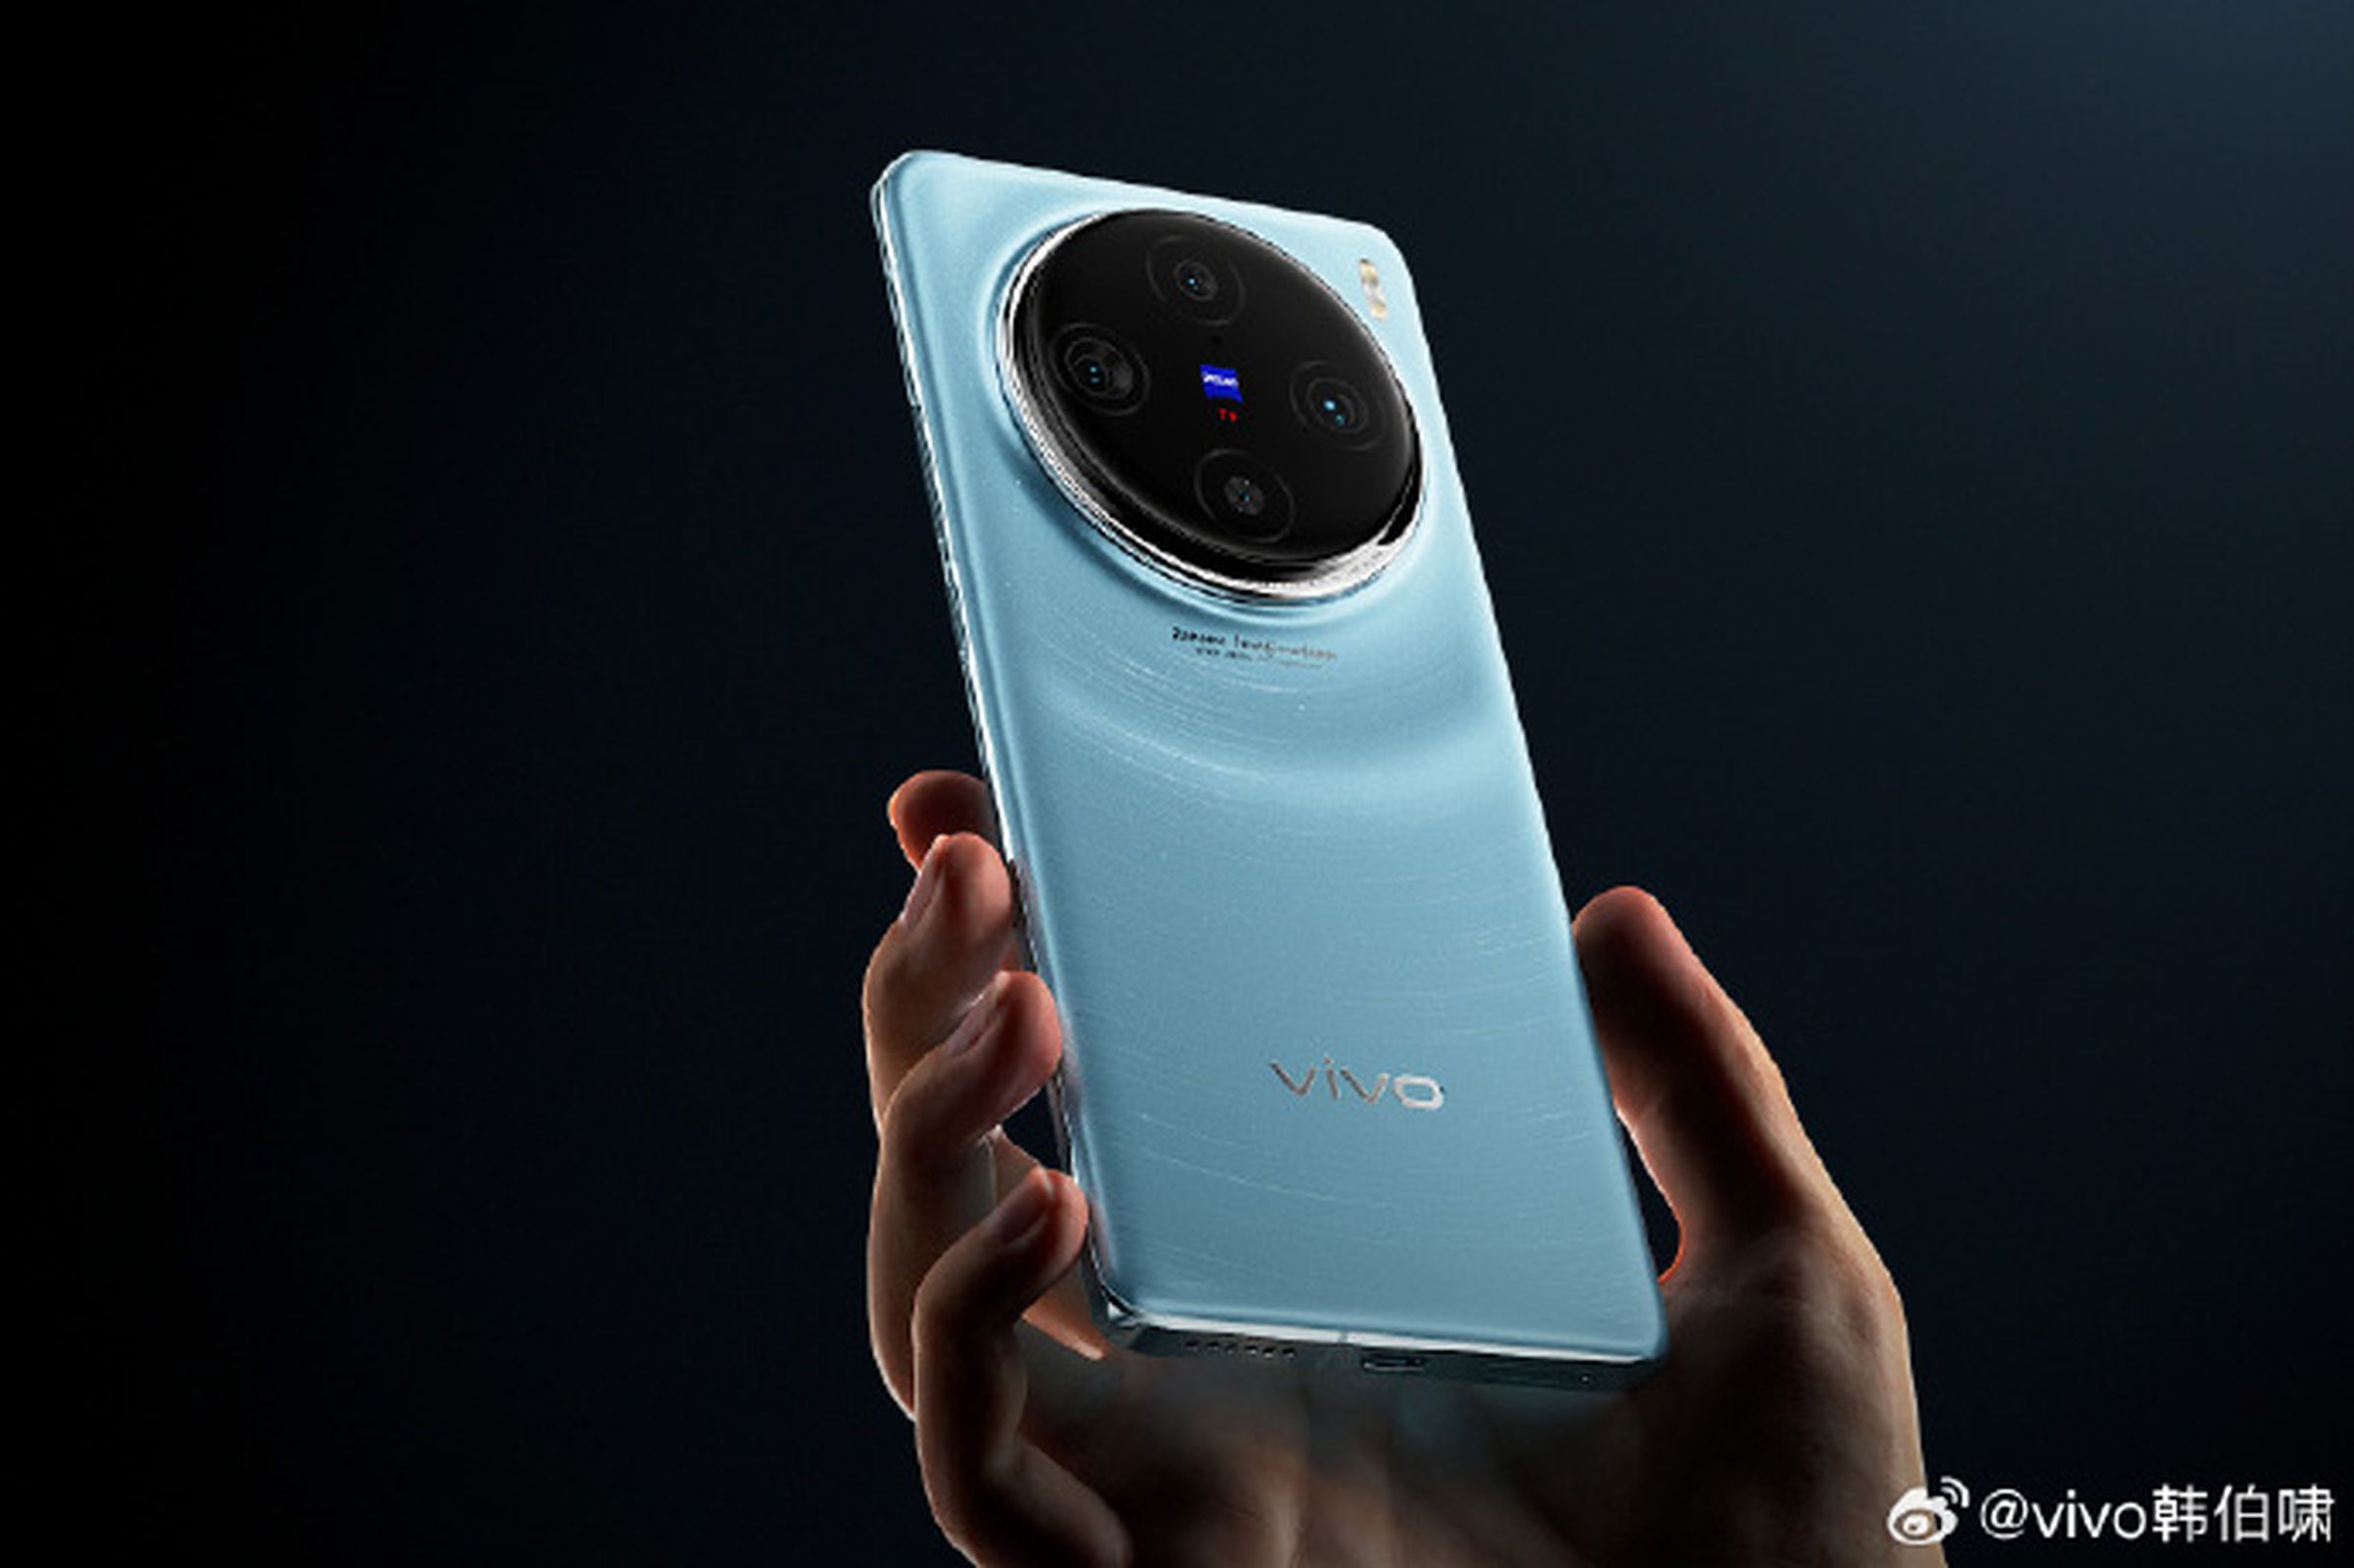 The back of the Vivo X100.